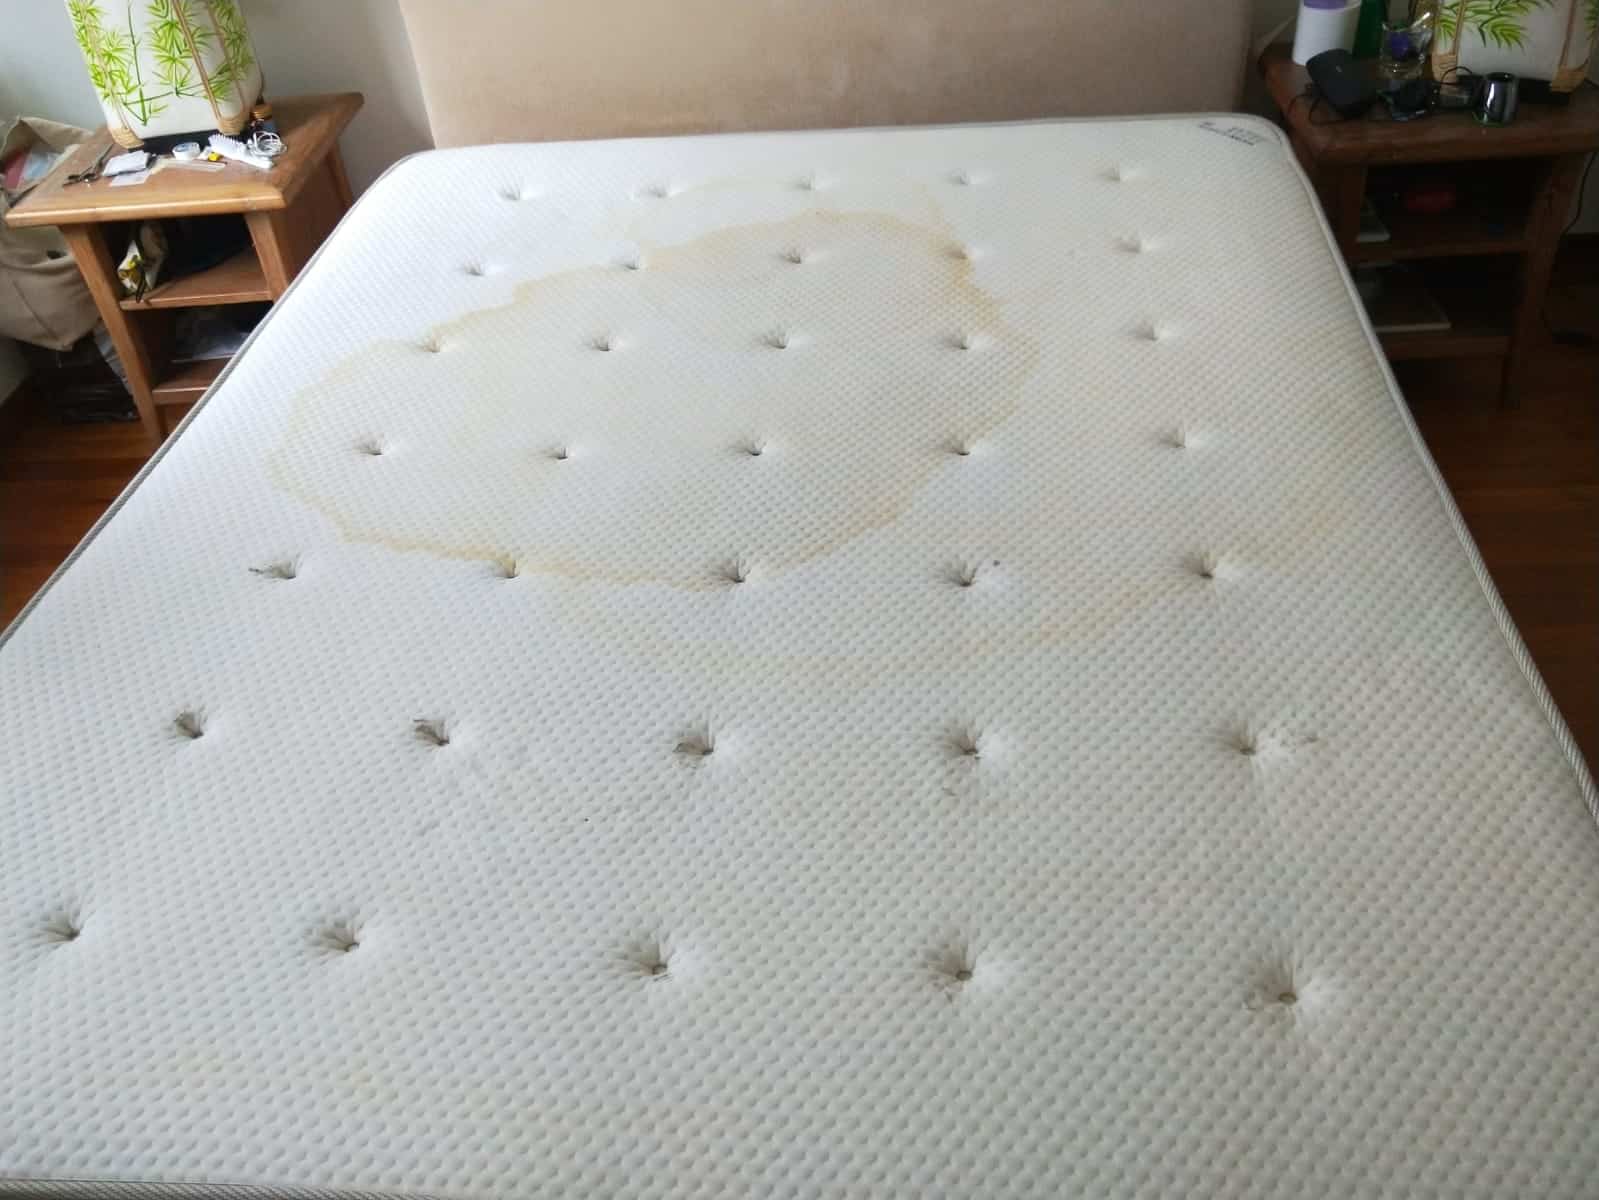 What Causes Yellow Stains On Mattresses?